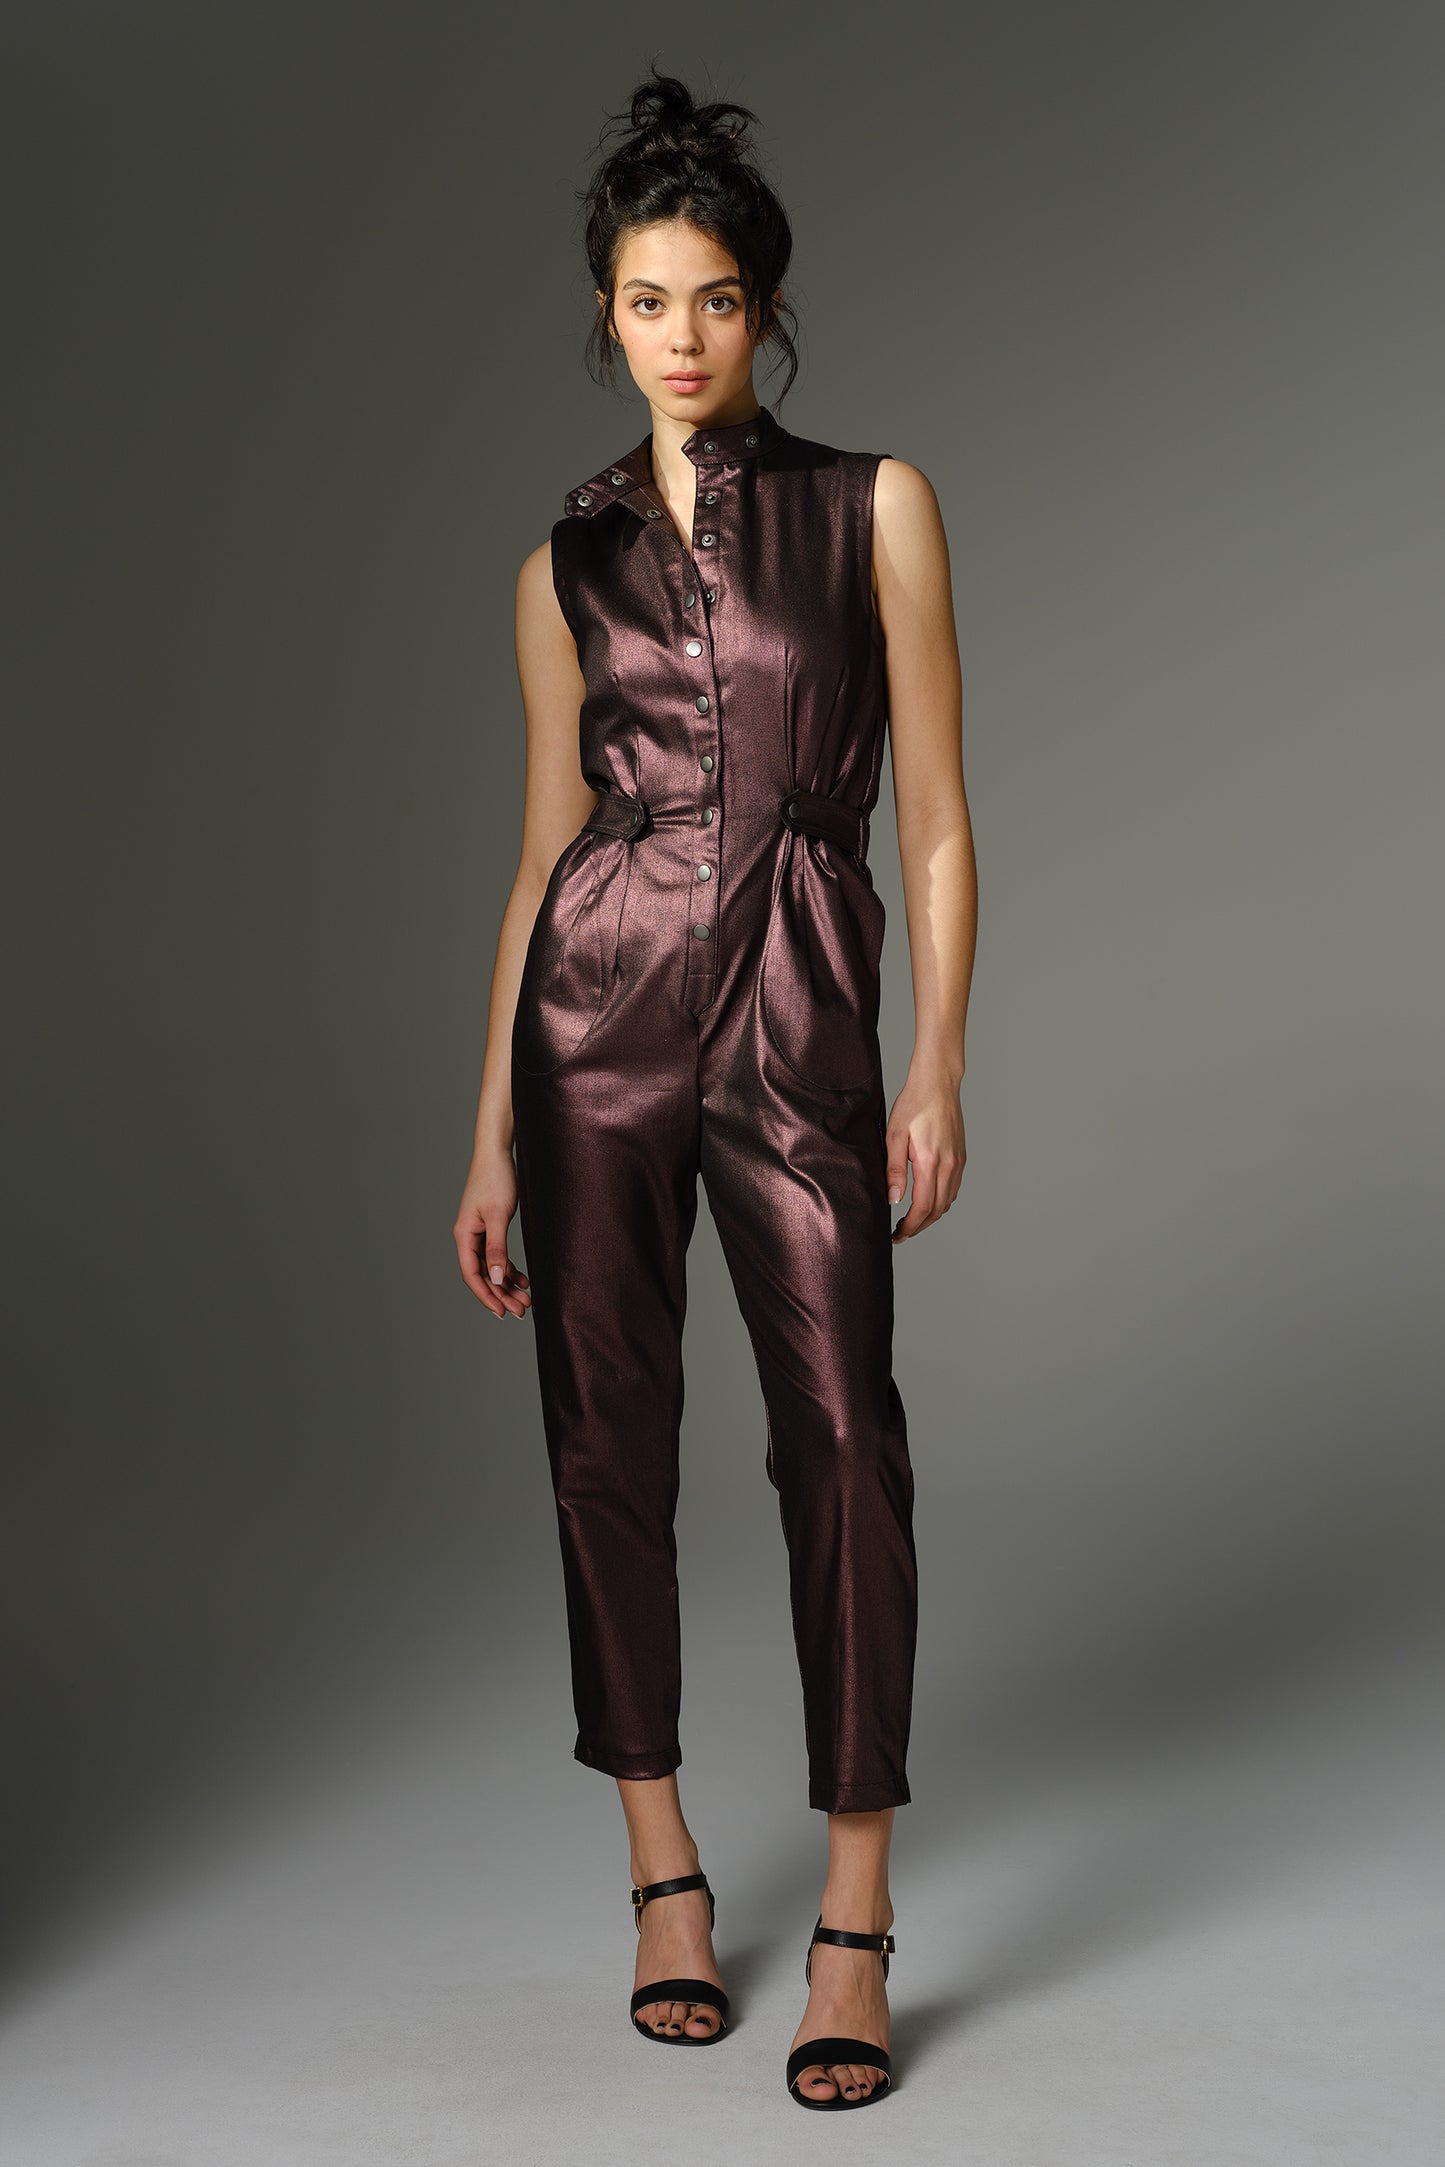 THE QUIMBY Jumpsuit - Sleeveless Plum Metallic Coated Stretch Cotton